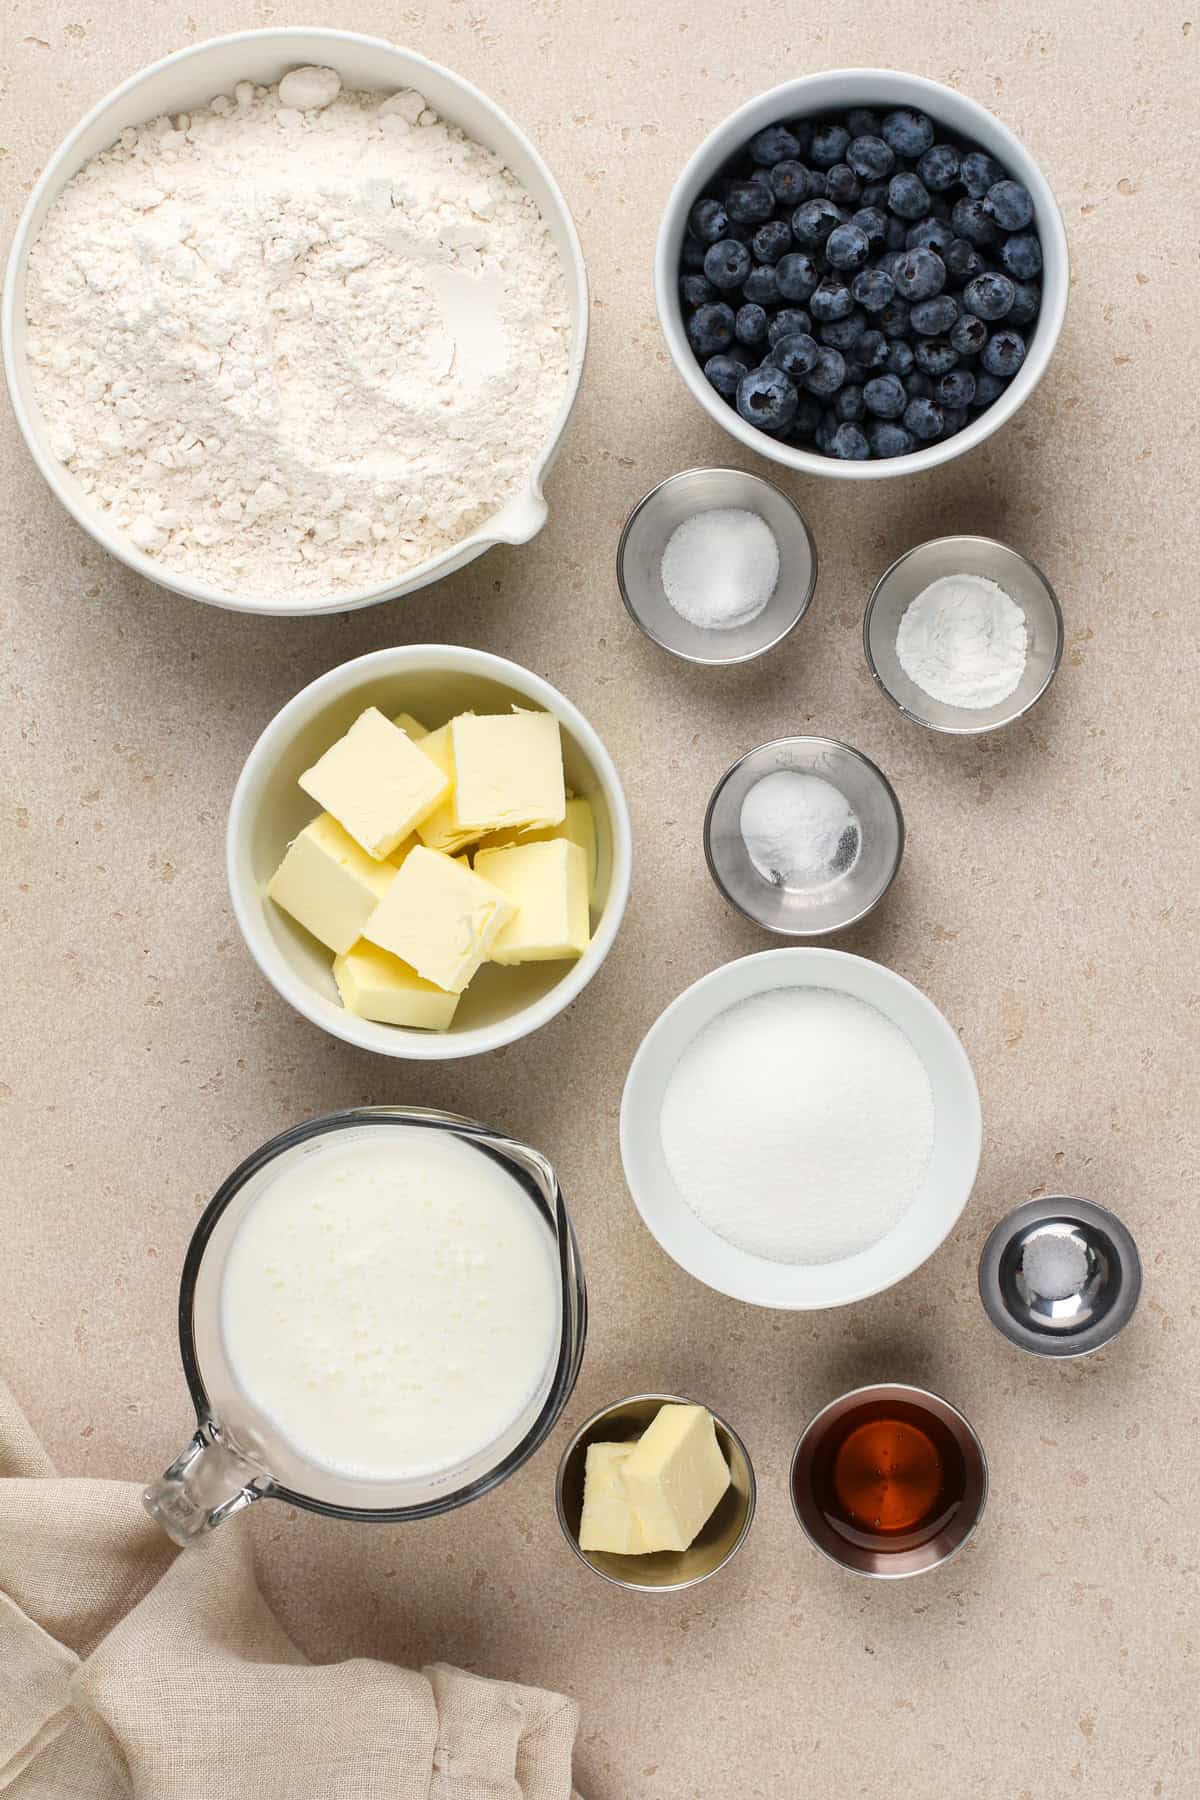 Ingredients for blueberry biscuits arranged on a beige countertop.